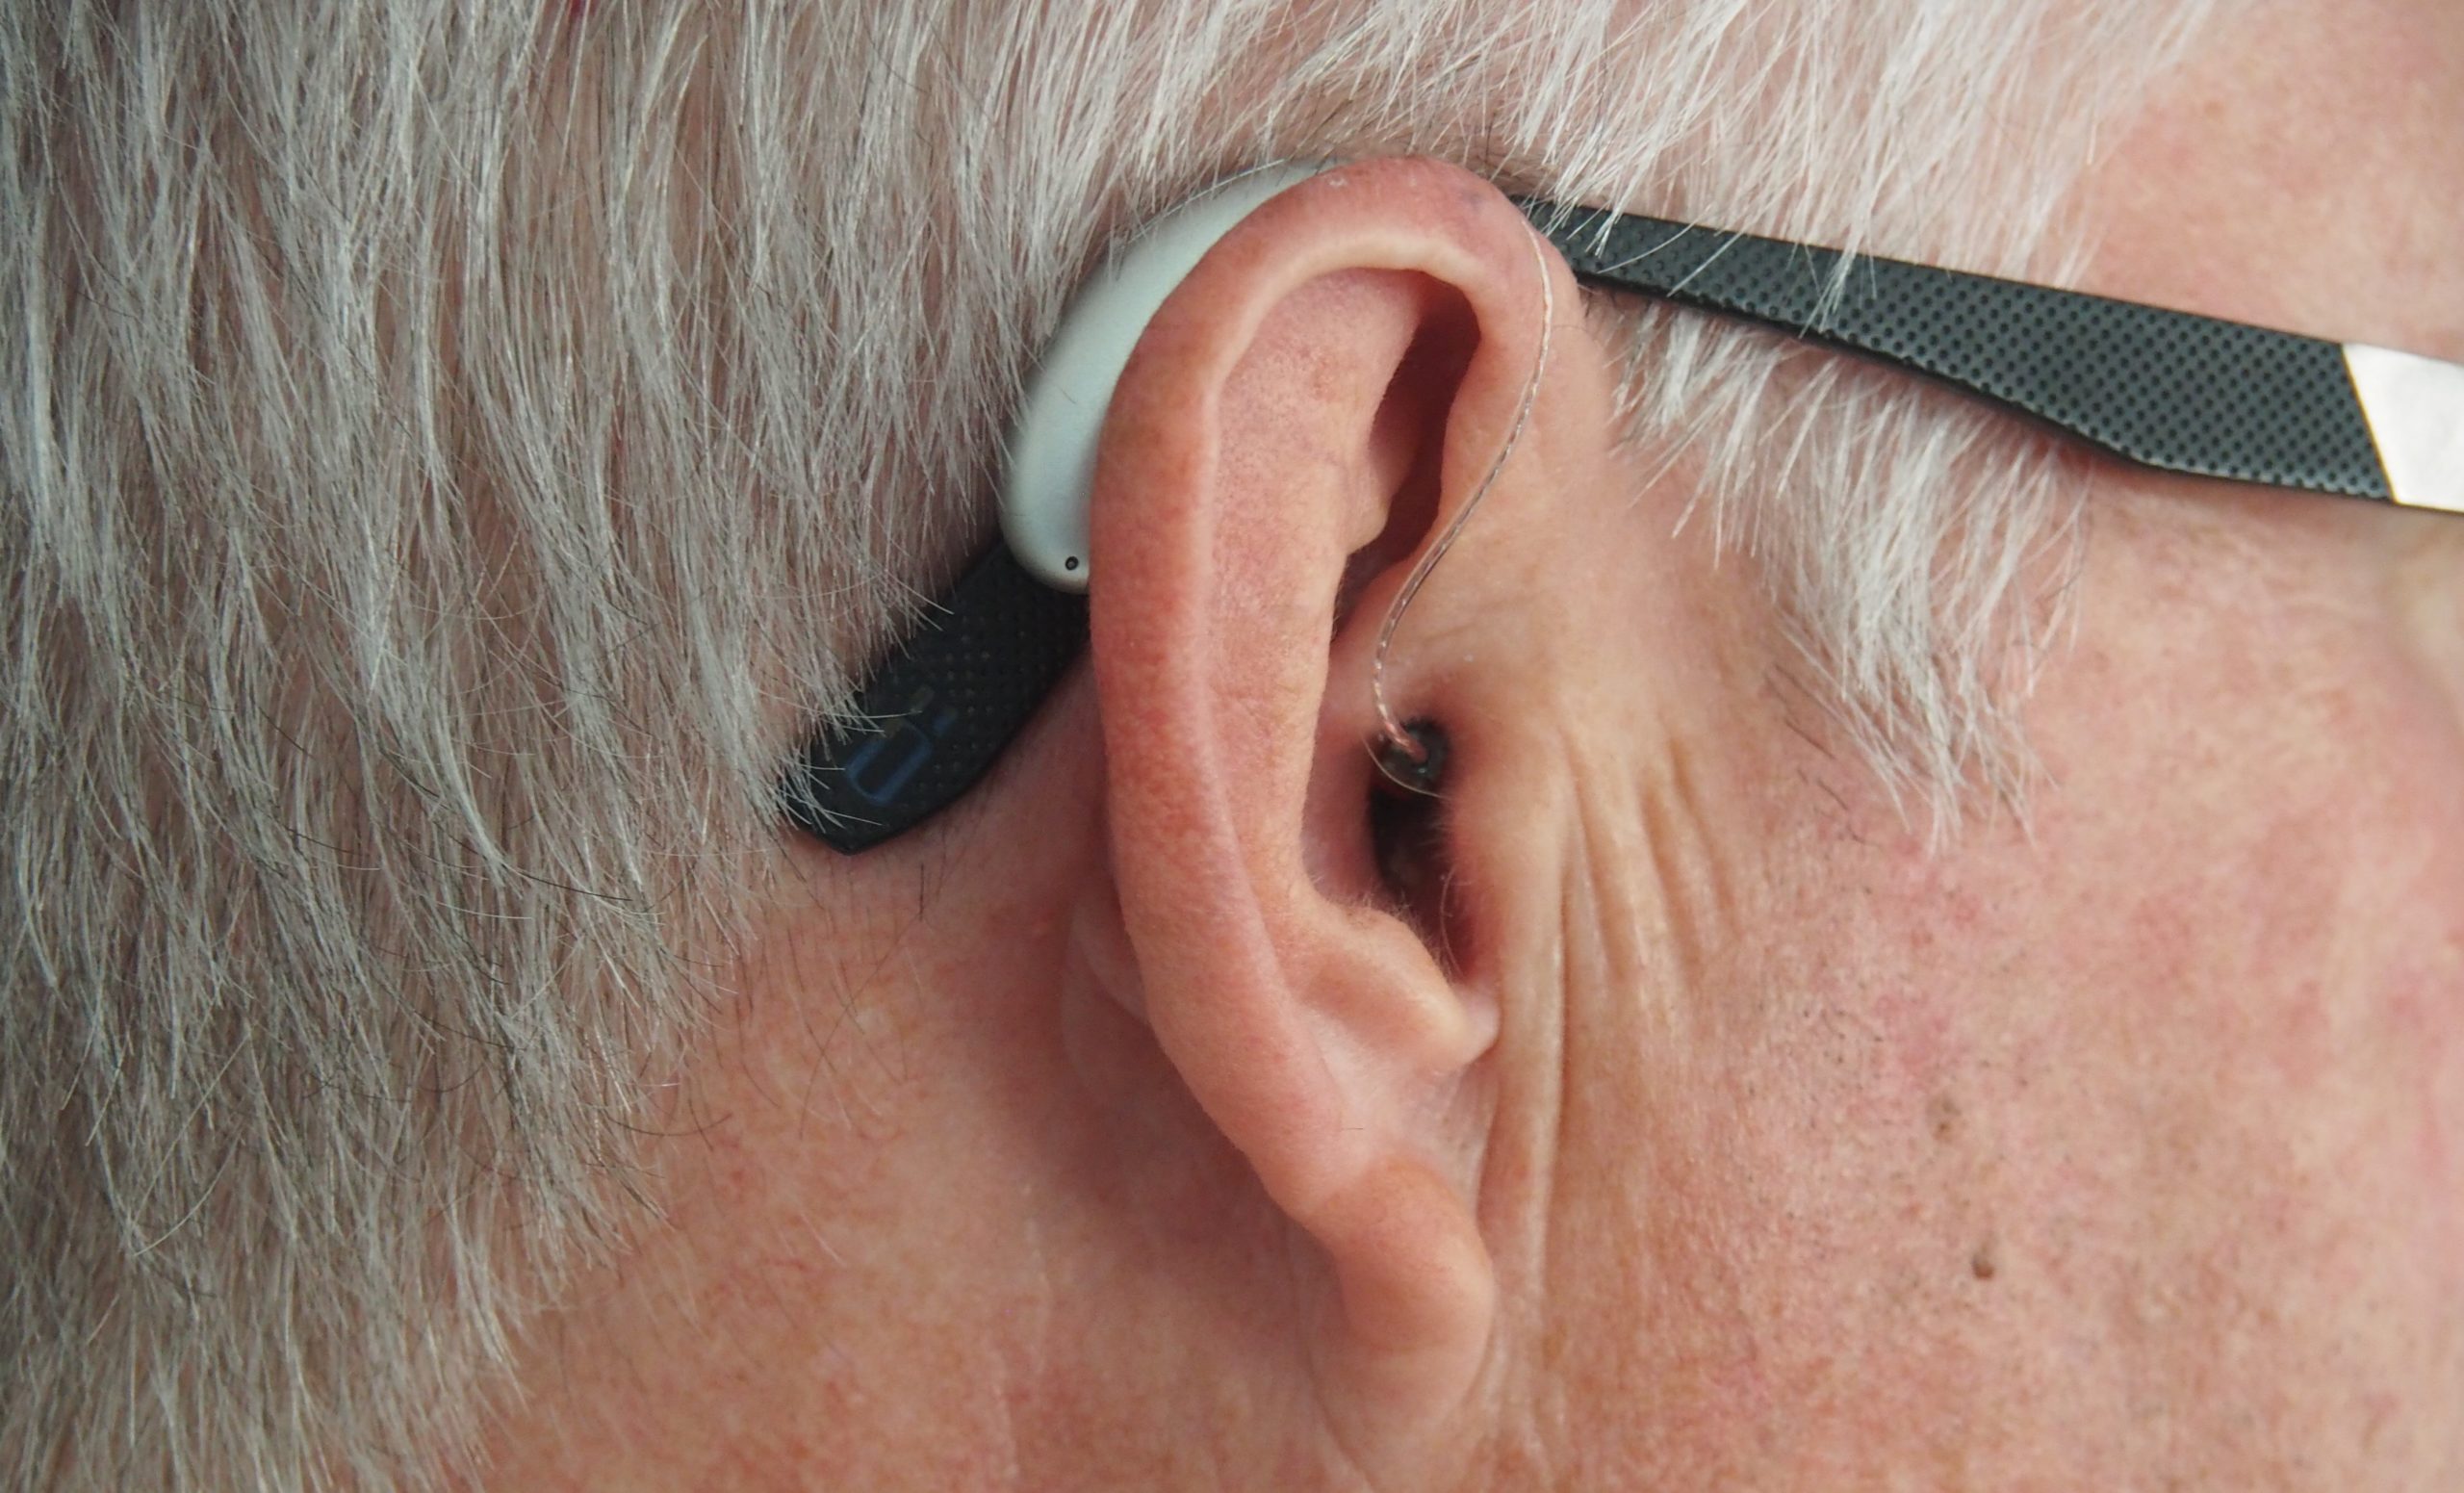 hearing declines with age, 5 tips to avoid hearing loss